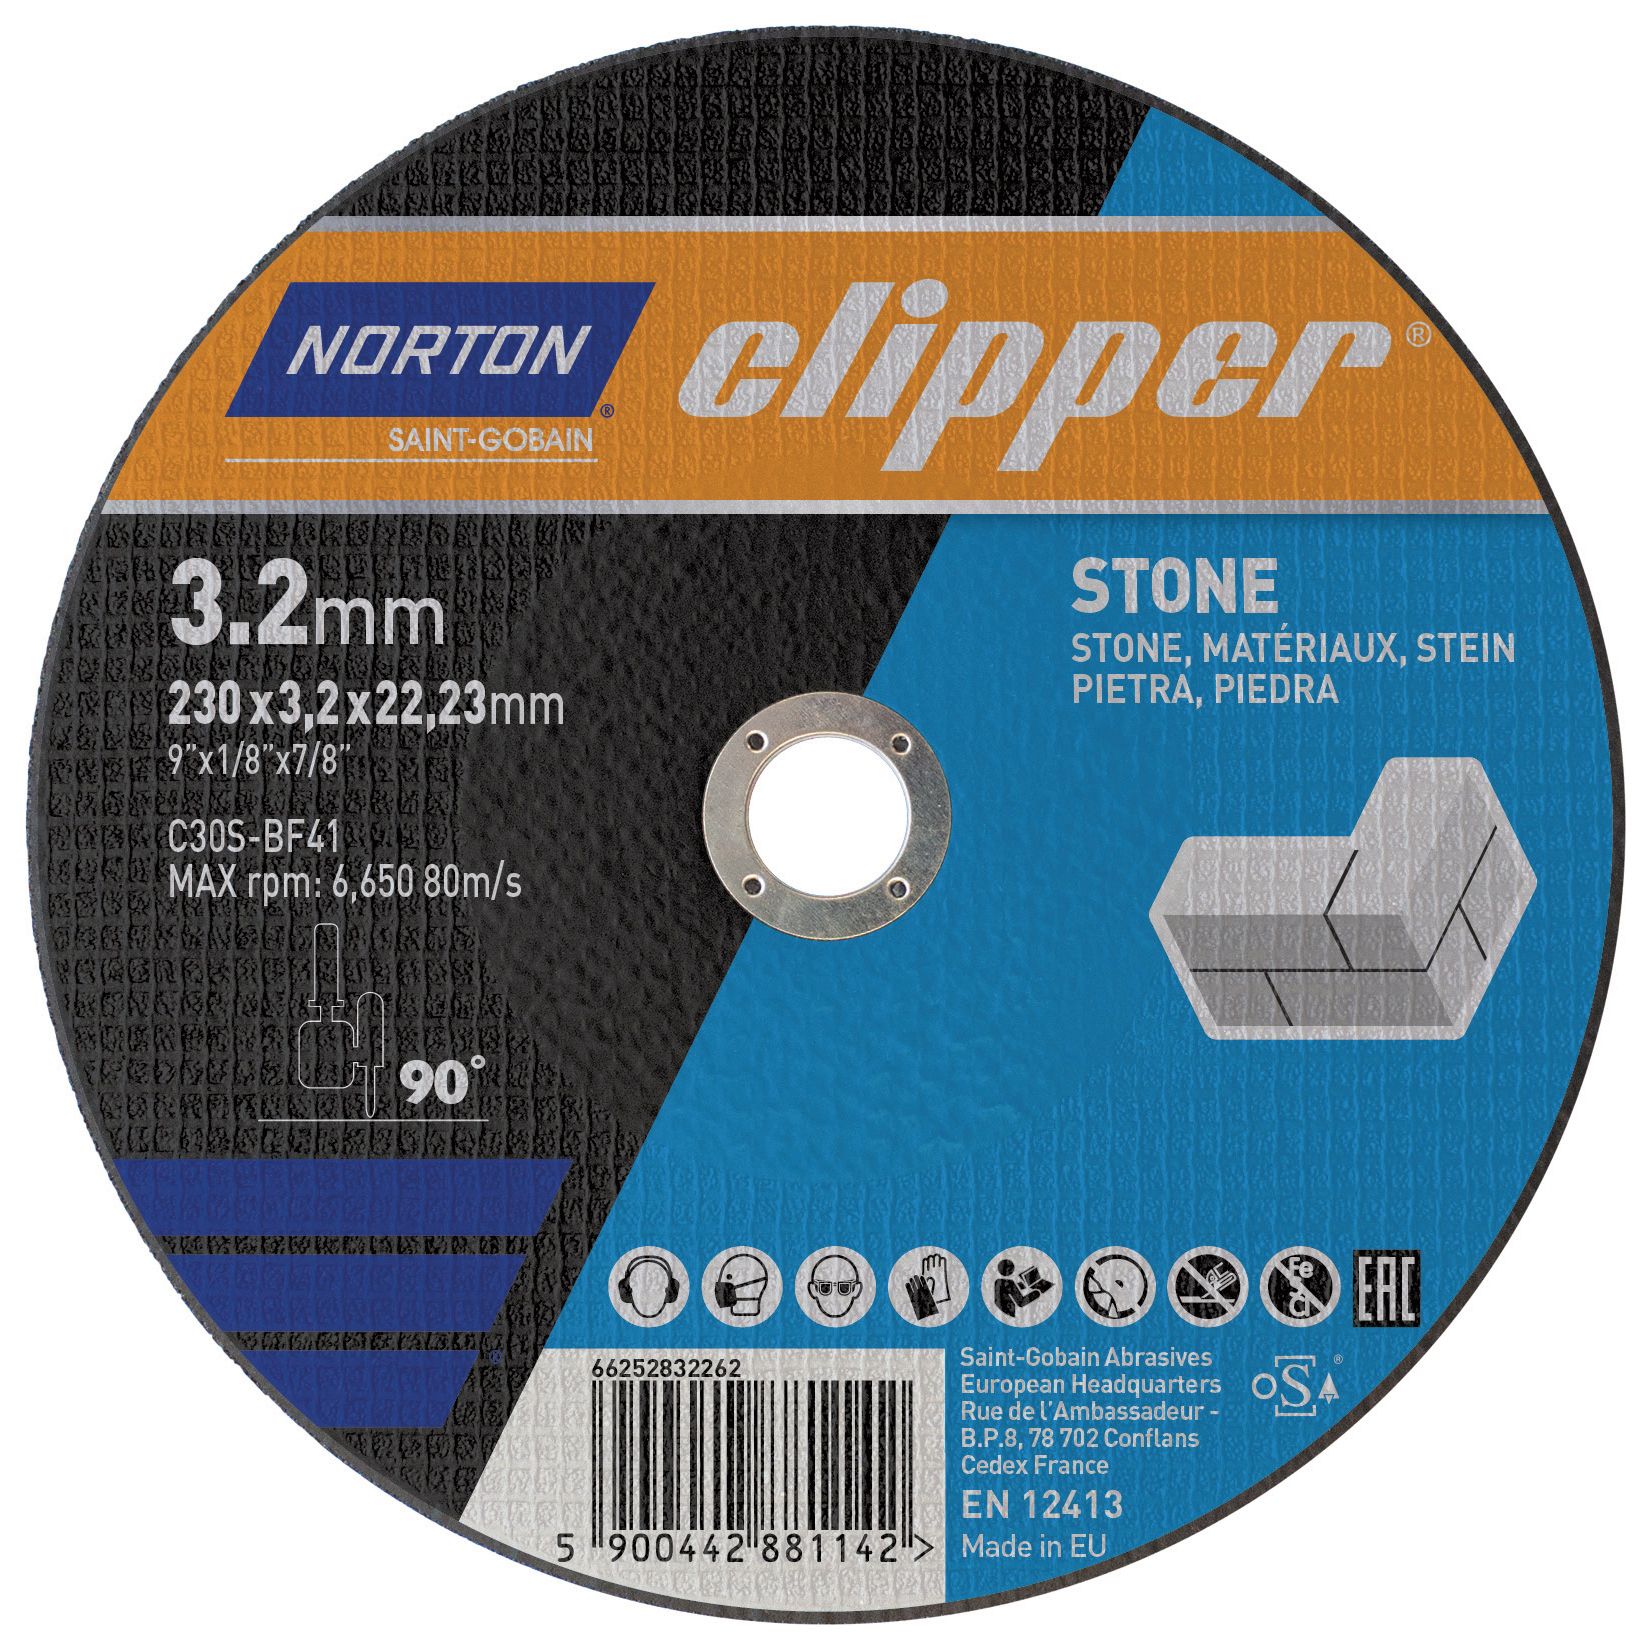 Image of Norton Clipper Stone Cutting Disc - 230mm